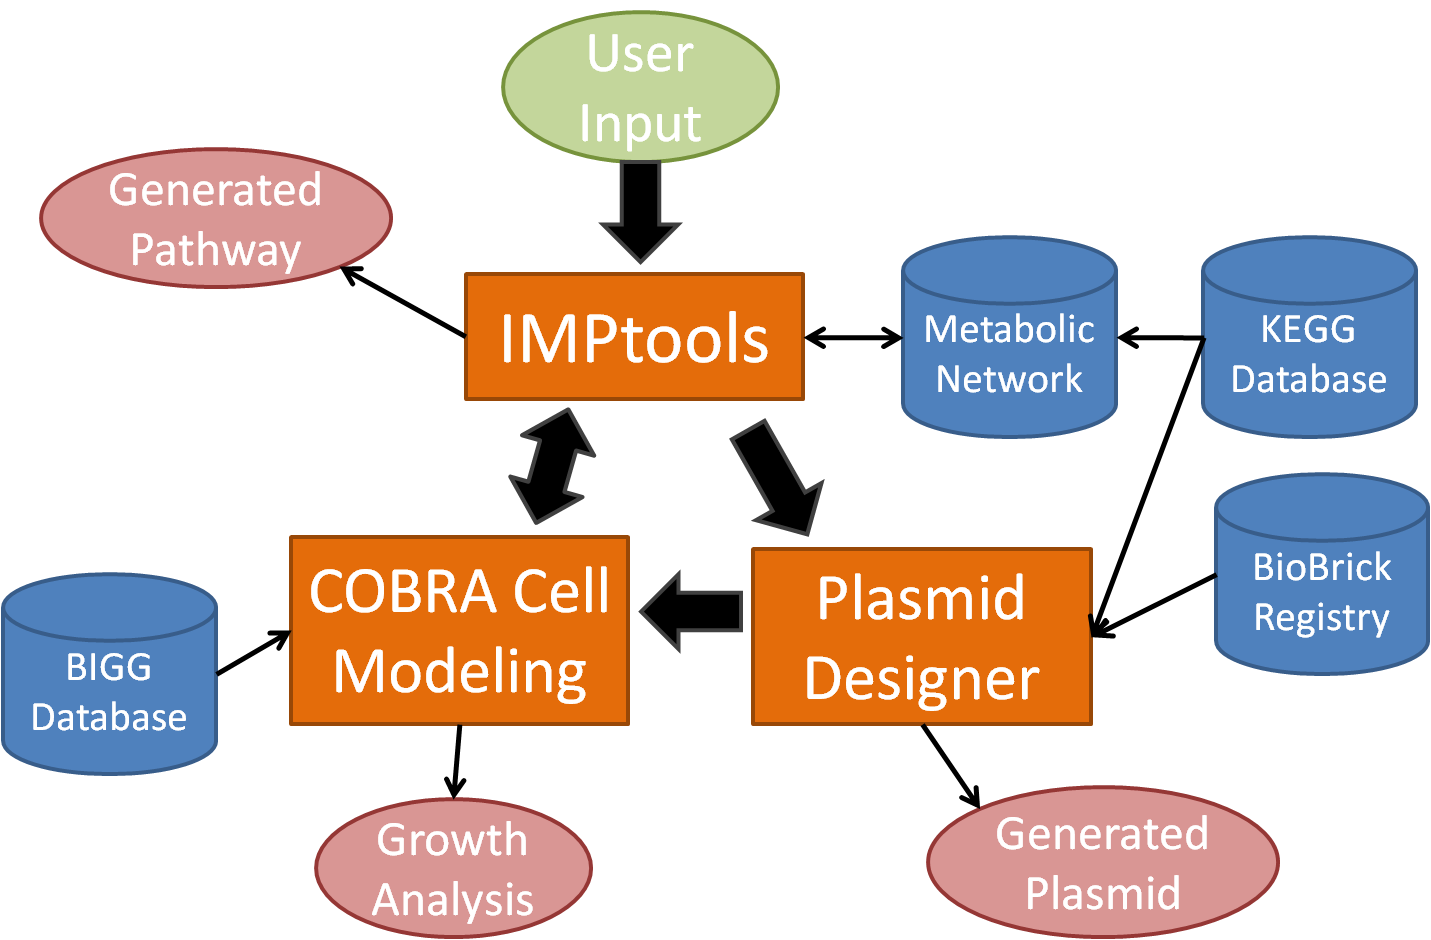 BioMORTAR 2.0 will, amongst other things allow the cell modeling tool to interact with IMPtools to determine the best pathway for cell growth